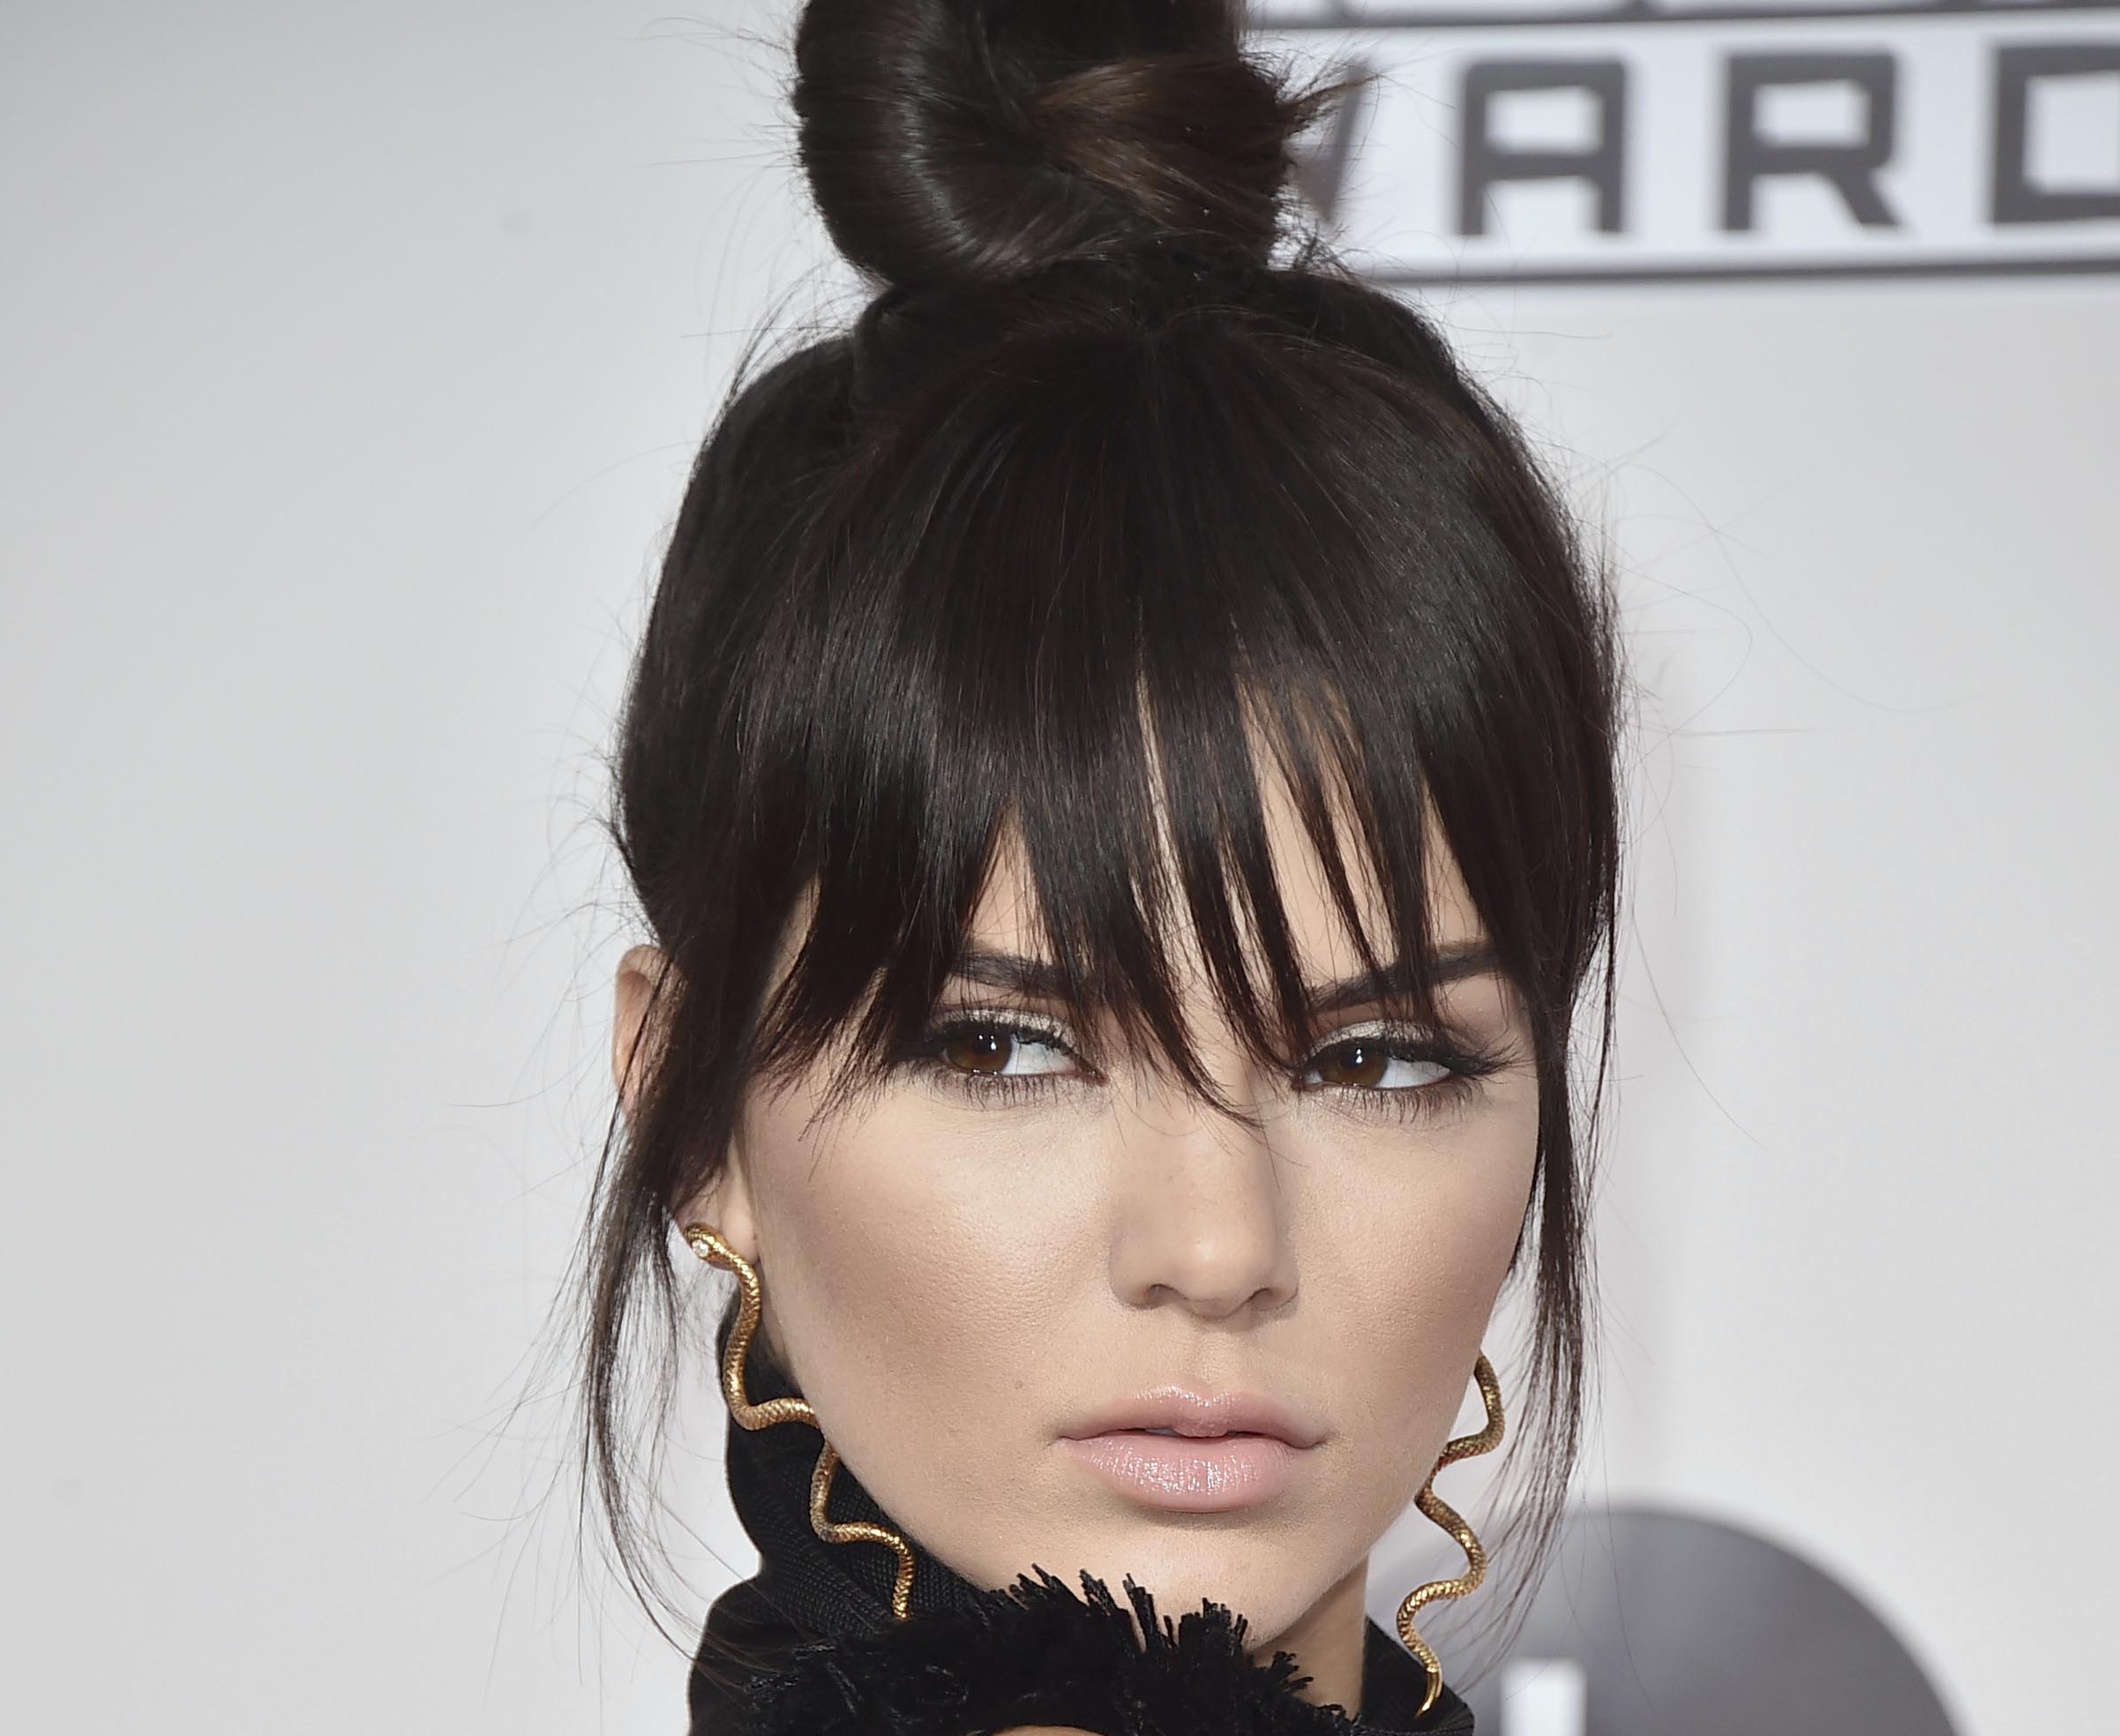 FILE - In this Nov. 22, 2015 file photo, Kendall Jenner arrives at the American Music Awards in Los Angeles. Photo: Reuters